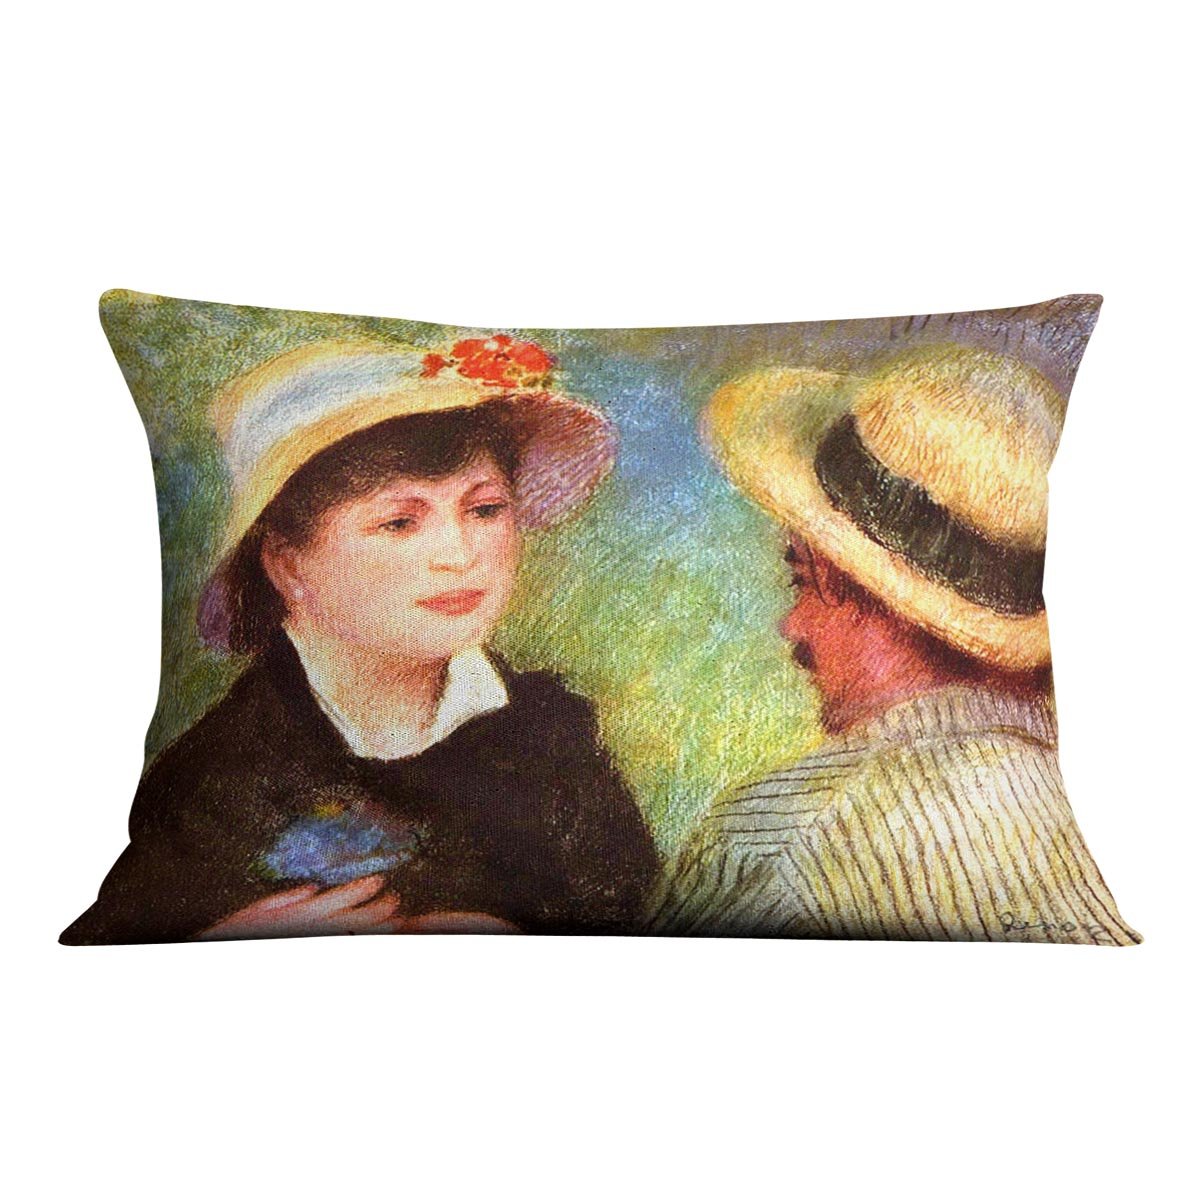 Les Canotiers by Renoir Throw Pillow